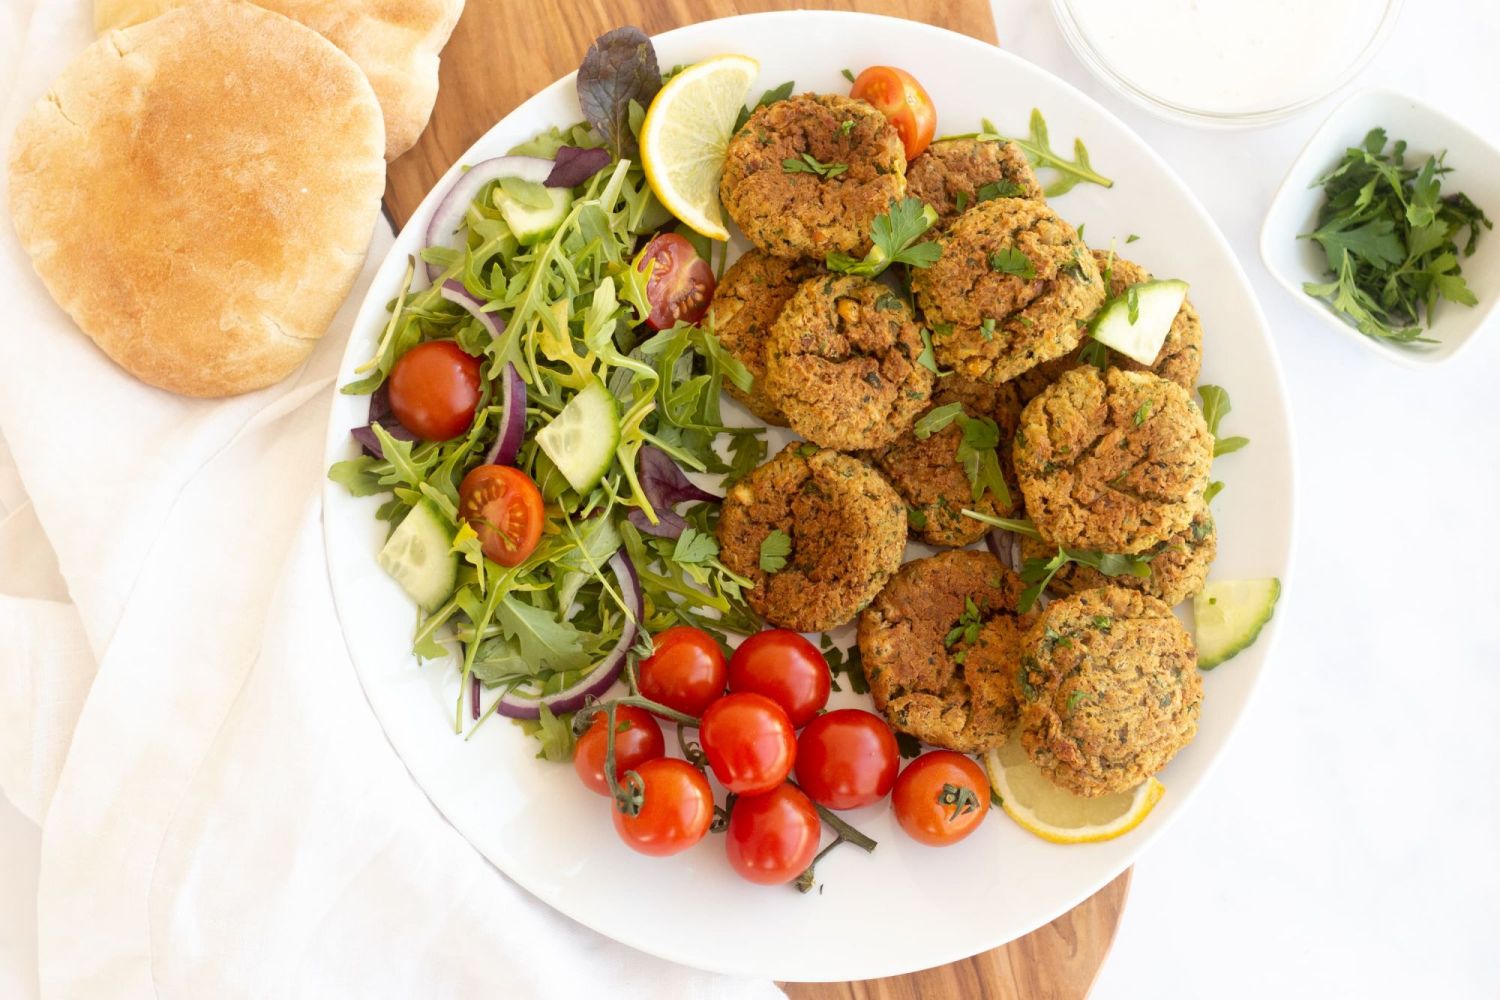 Chickpea falafel that are baked with crispy edges on a plate with lettuce, tomatoes, and cucumbers.